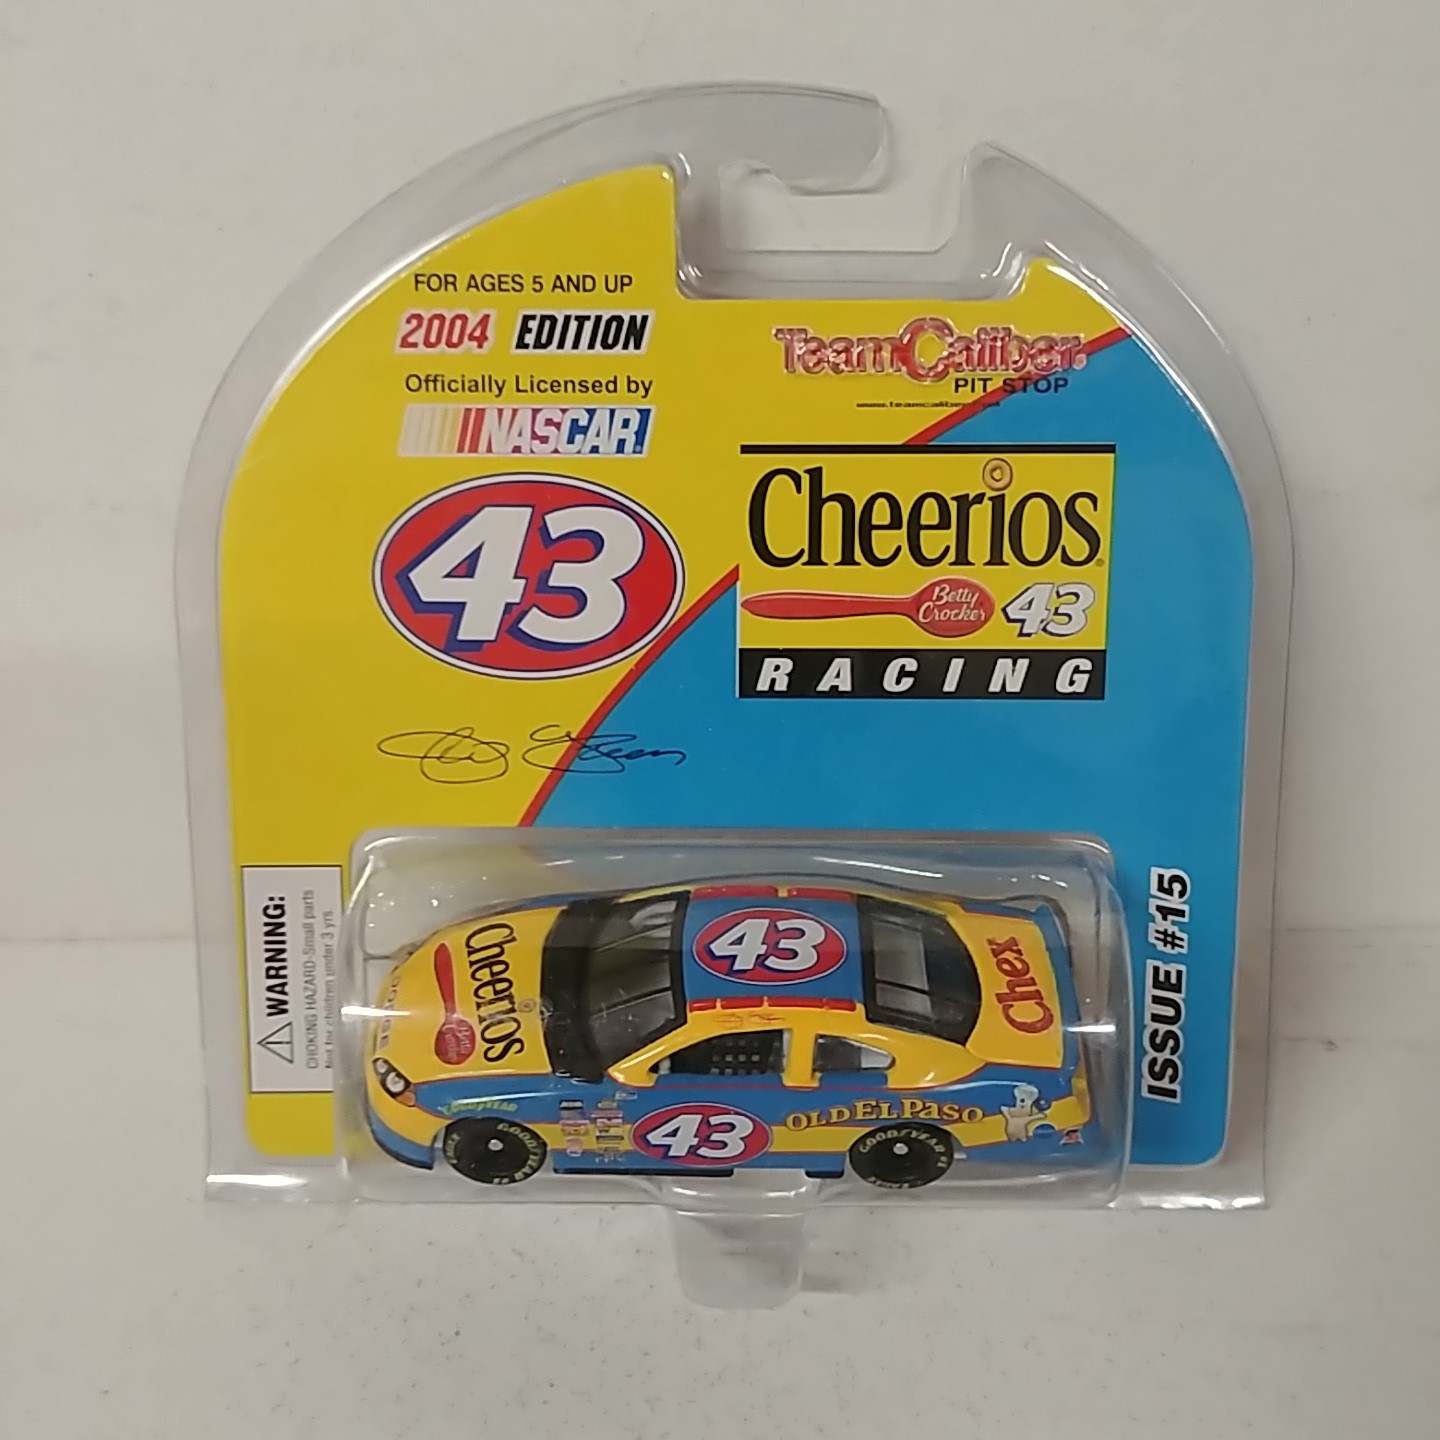 2004 Jeff Green 1/64th Cheerios Pitstop Series car